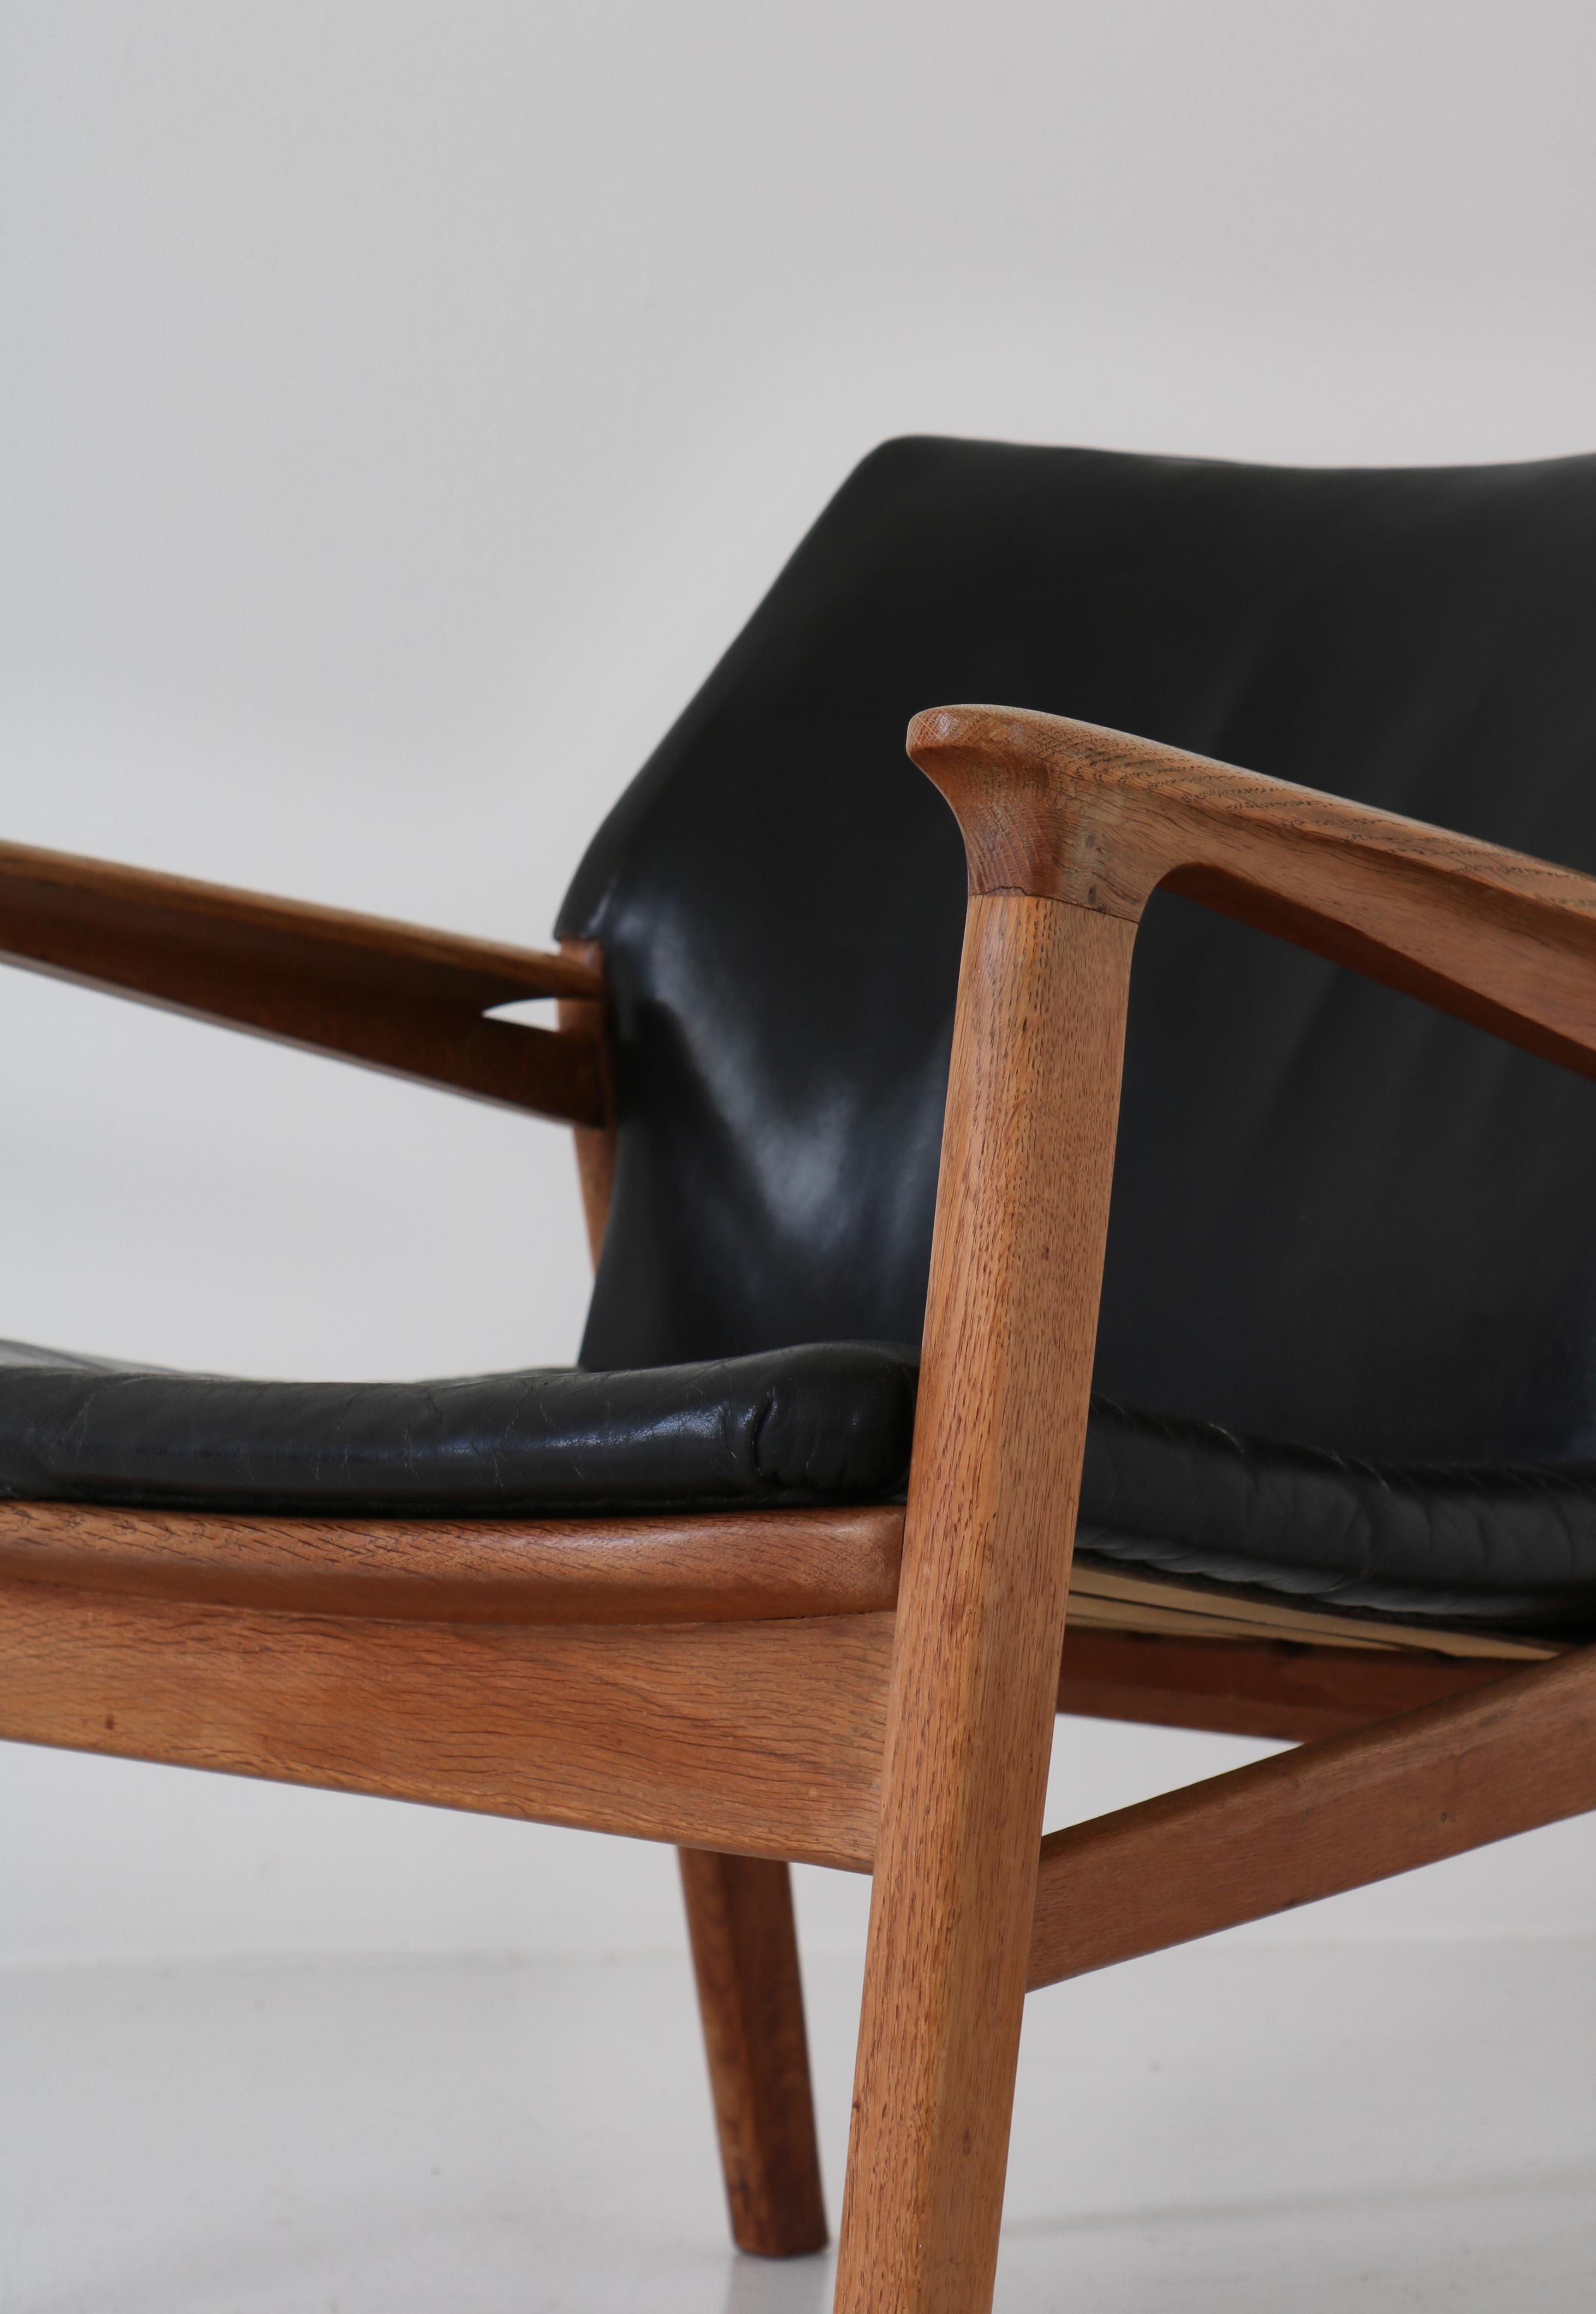 Danish Modern Lounge Chair in Patinated Oak & Black Leather by Hans Olsen, 1950s For Sale 1